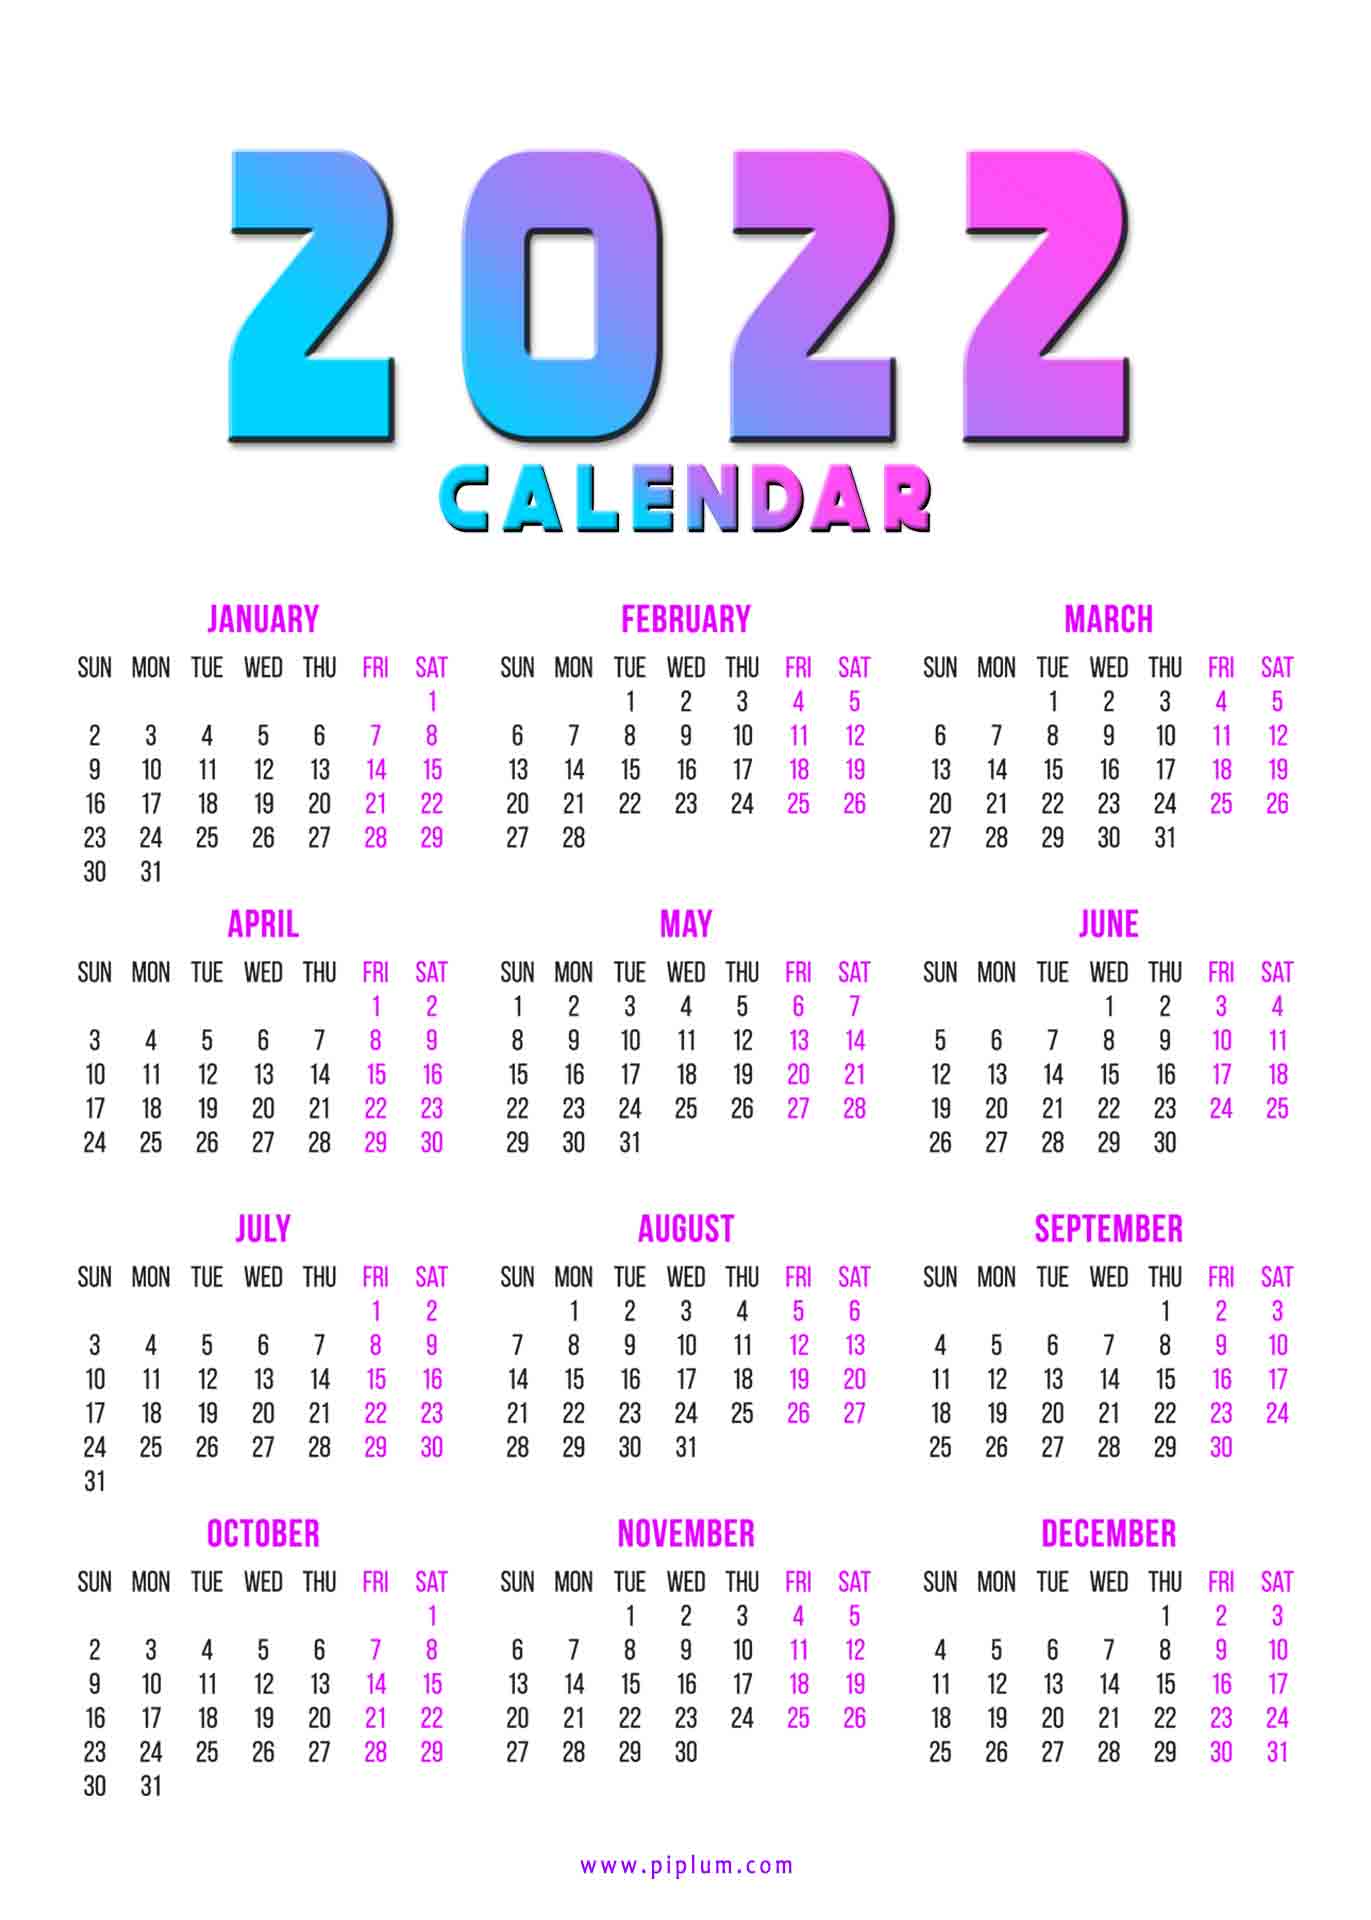 Free 2022 Calendar Mailed To You Free 2022 Calendar! Printable And Download Ready!